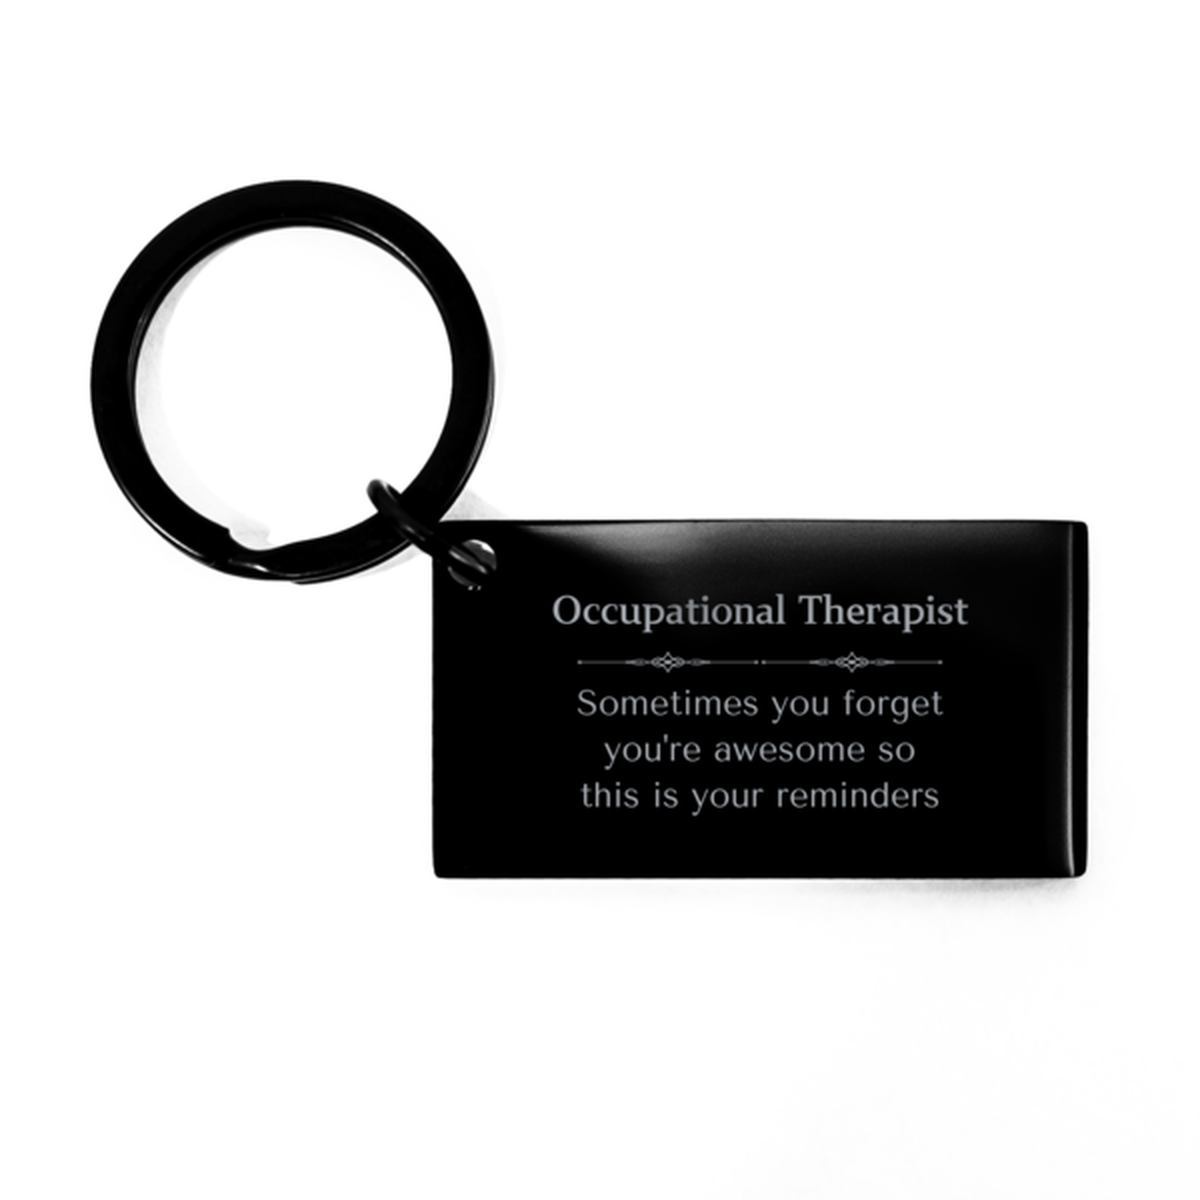 Sentimental Occupational Therapist Keychain, Physical Therapist Sometimes you forget you're awesome so this is your reminders, Graduation Christmas Birthday Gifts for Occupational Therapist, Men, Women, Coworkers